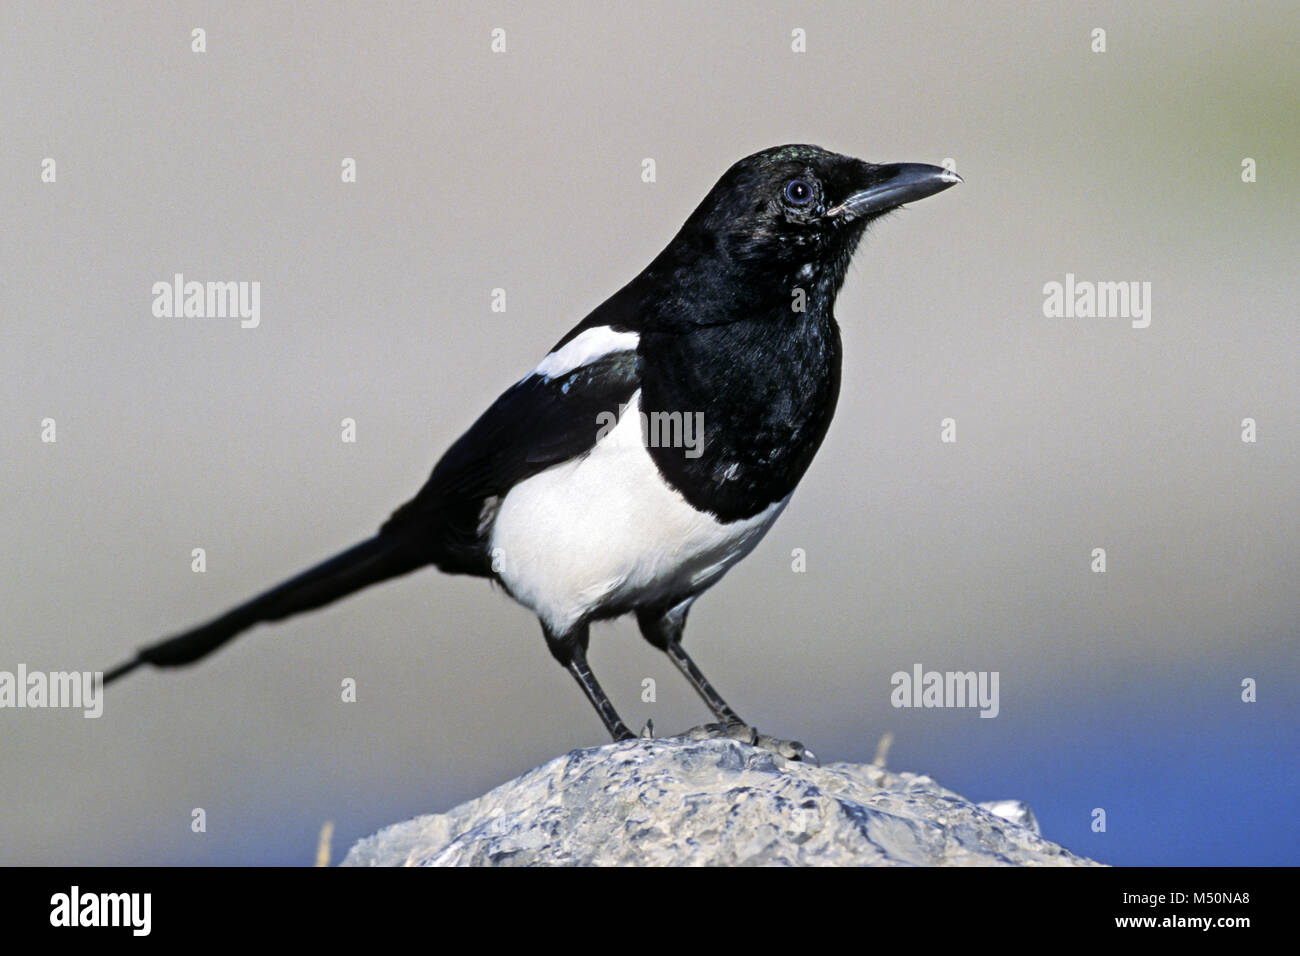 Black-billed Magpie / American Magpie Stock Photo